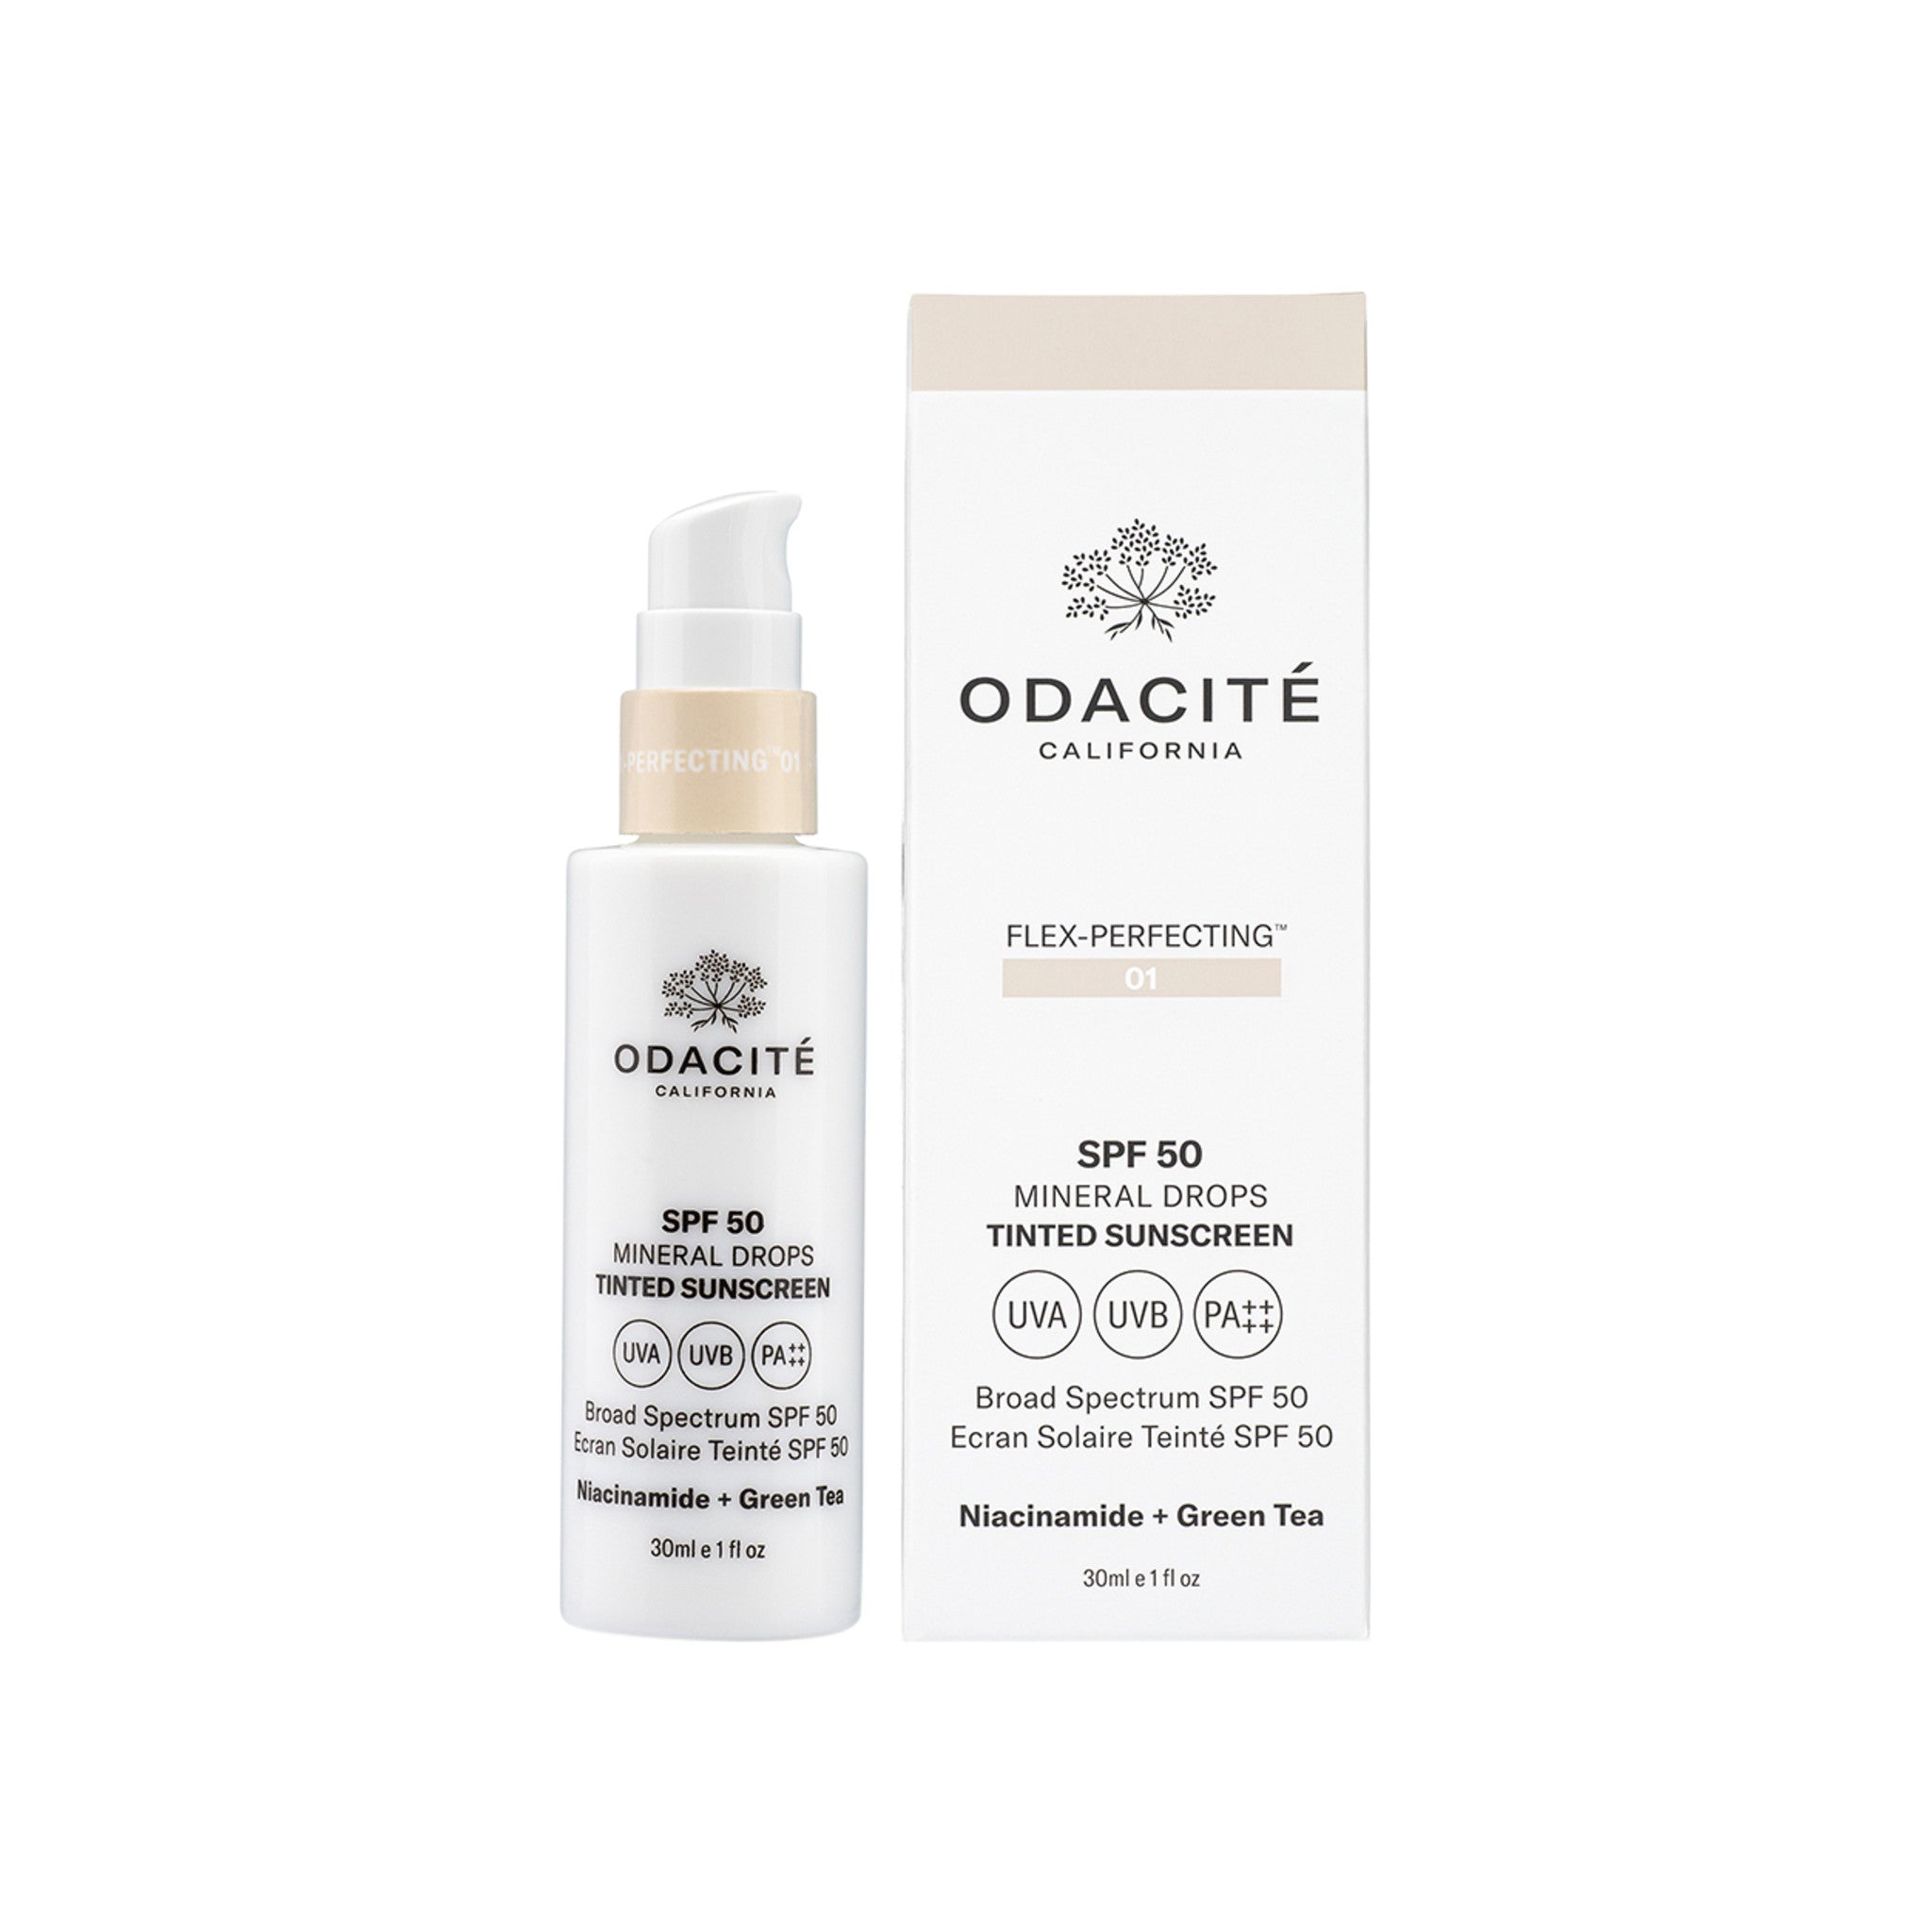 Odacité Flex-Perfecting Mineral Drops Tinted Sunscreen SPF 50 Color/Shade variant: 01 Fair main image.